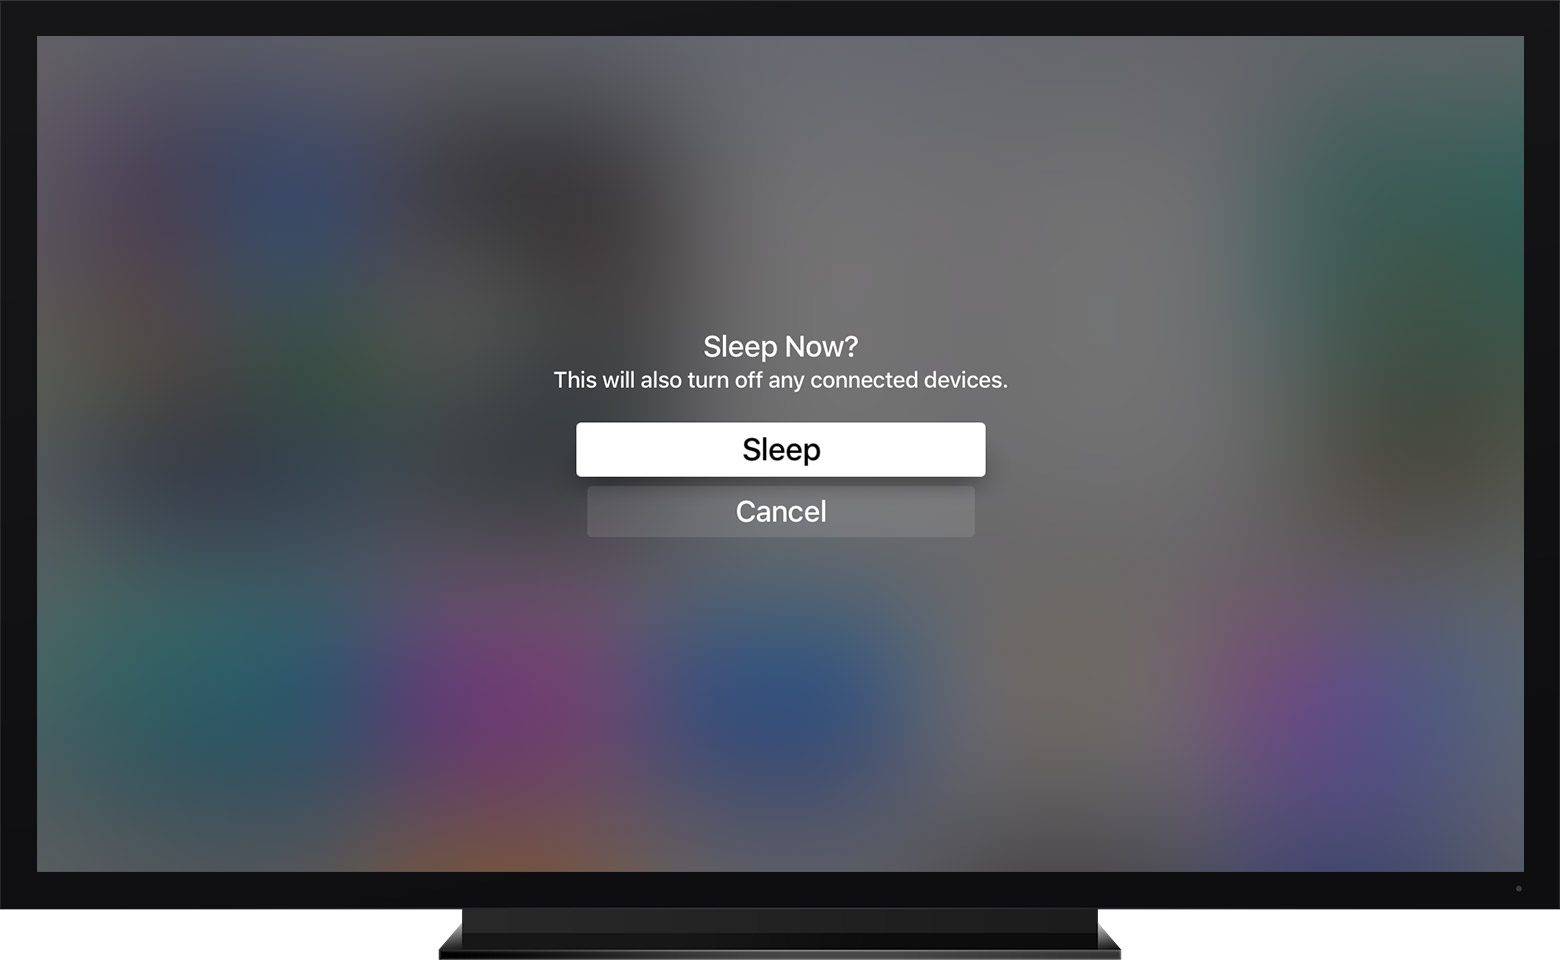 Have connected devices turn off in sleep … - Apple Community